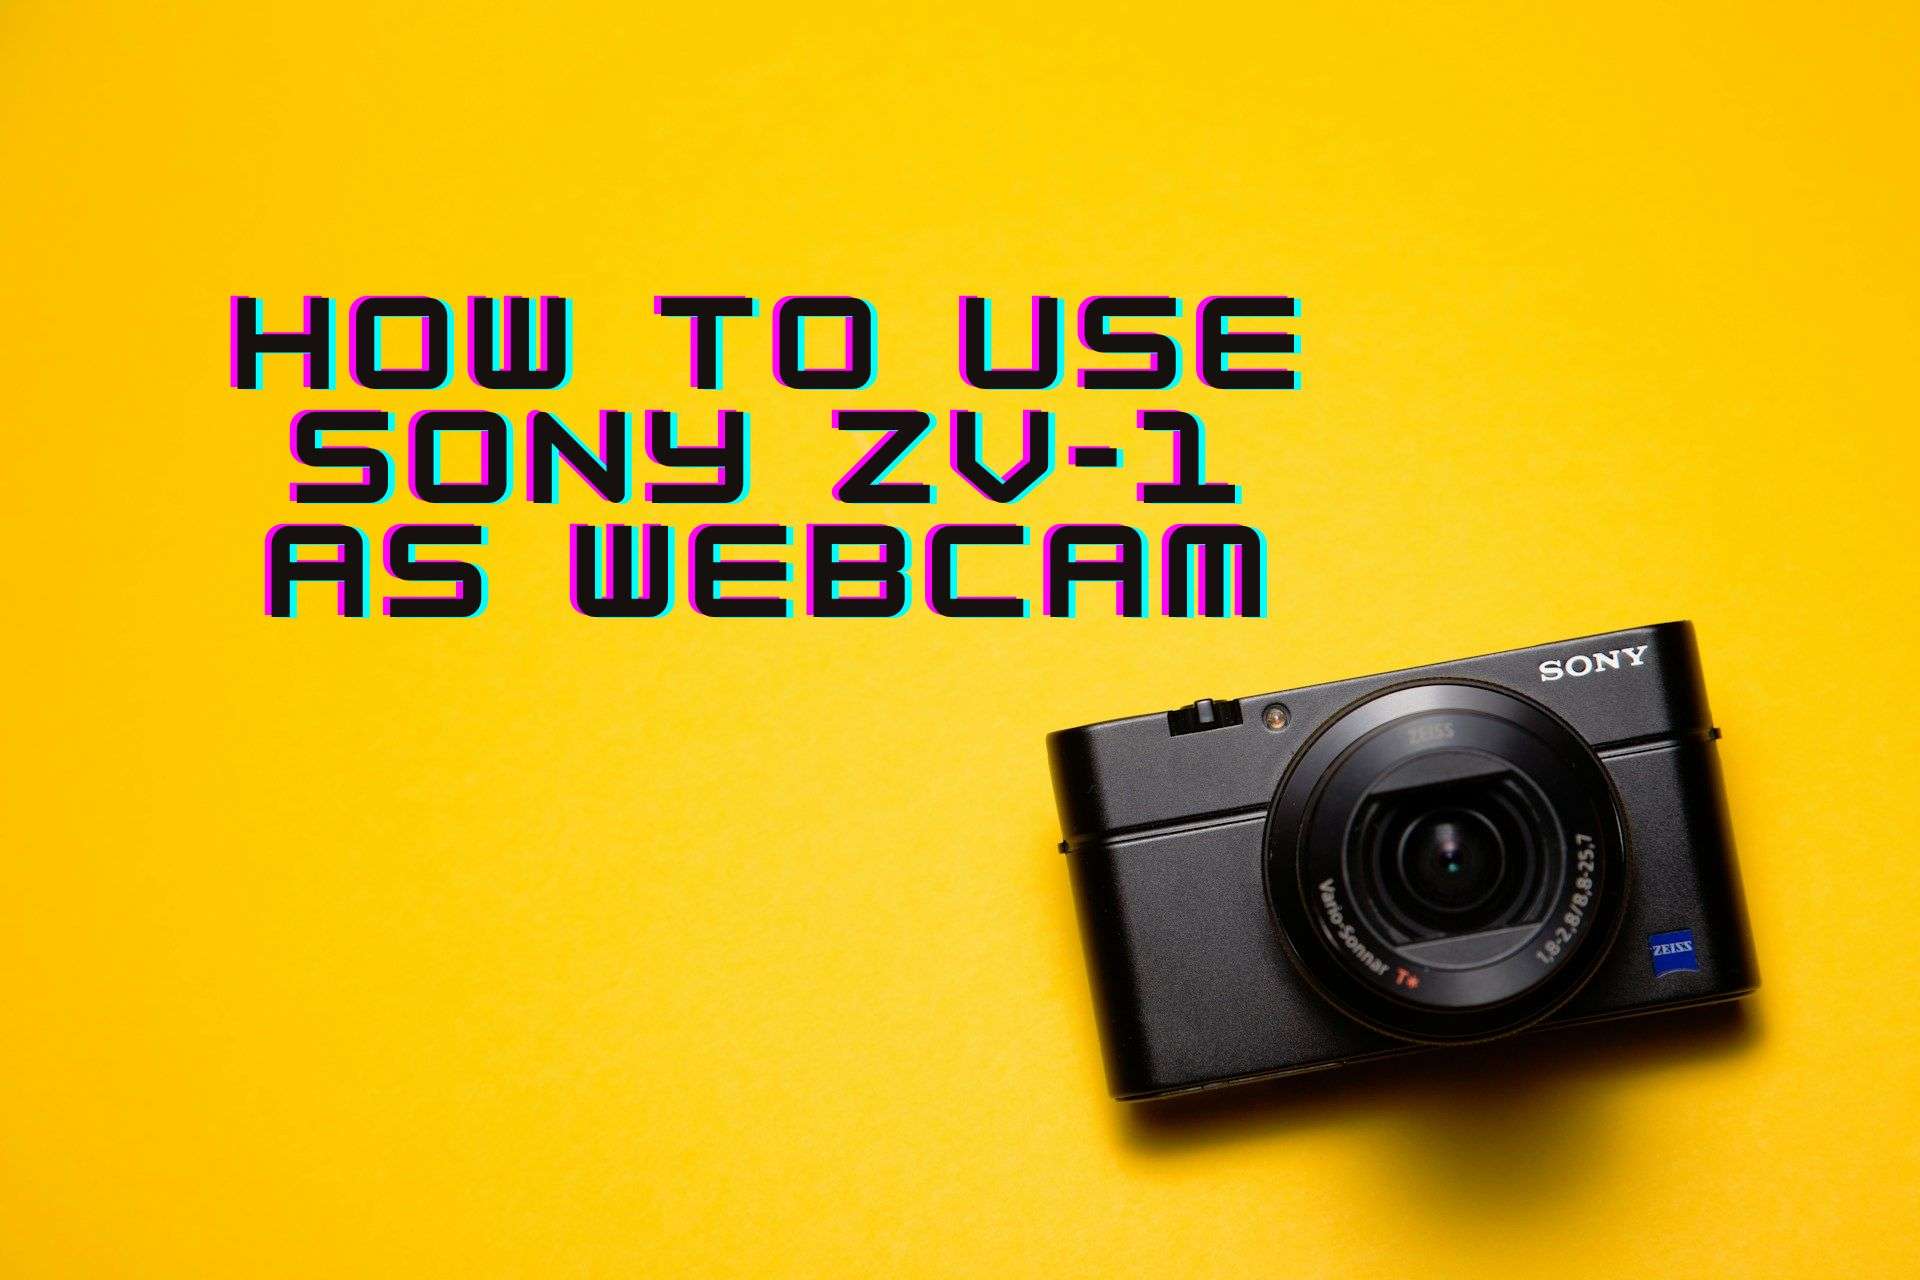 How to Use Sony ZV-1 as Webcam